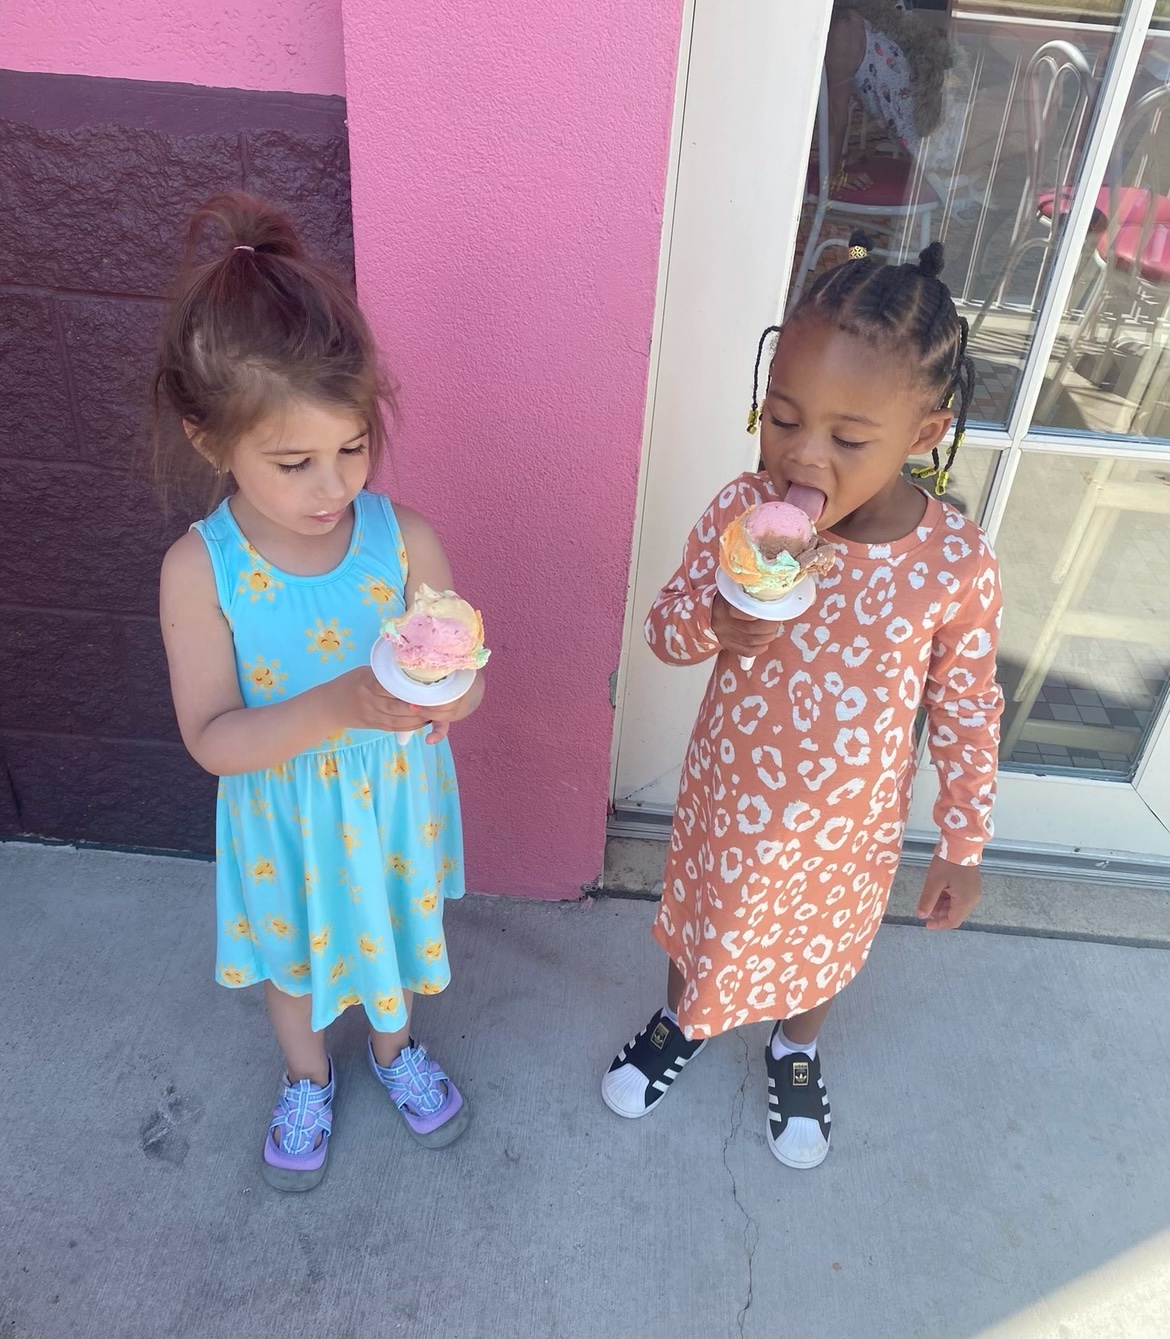 Two girls eating Rainbow Cones outside of a bright pink store.